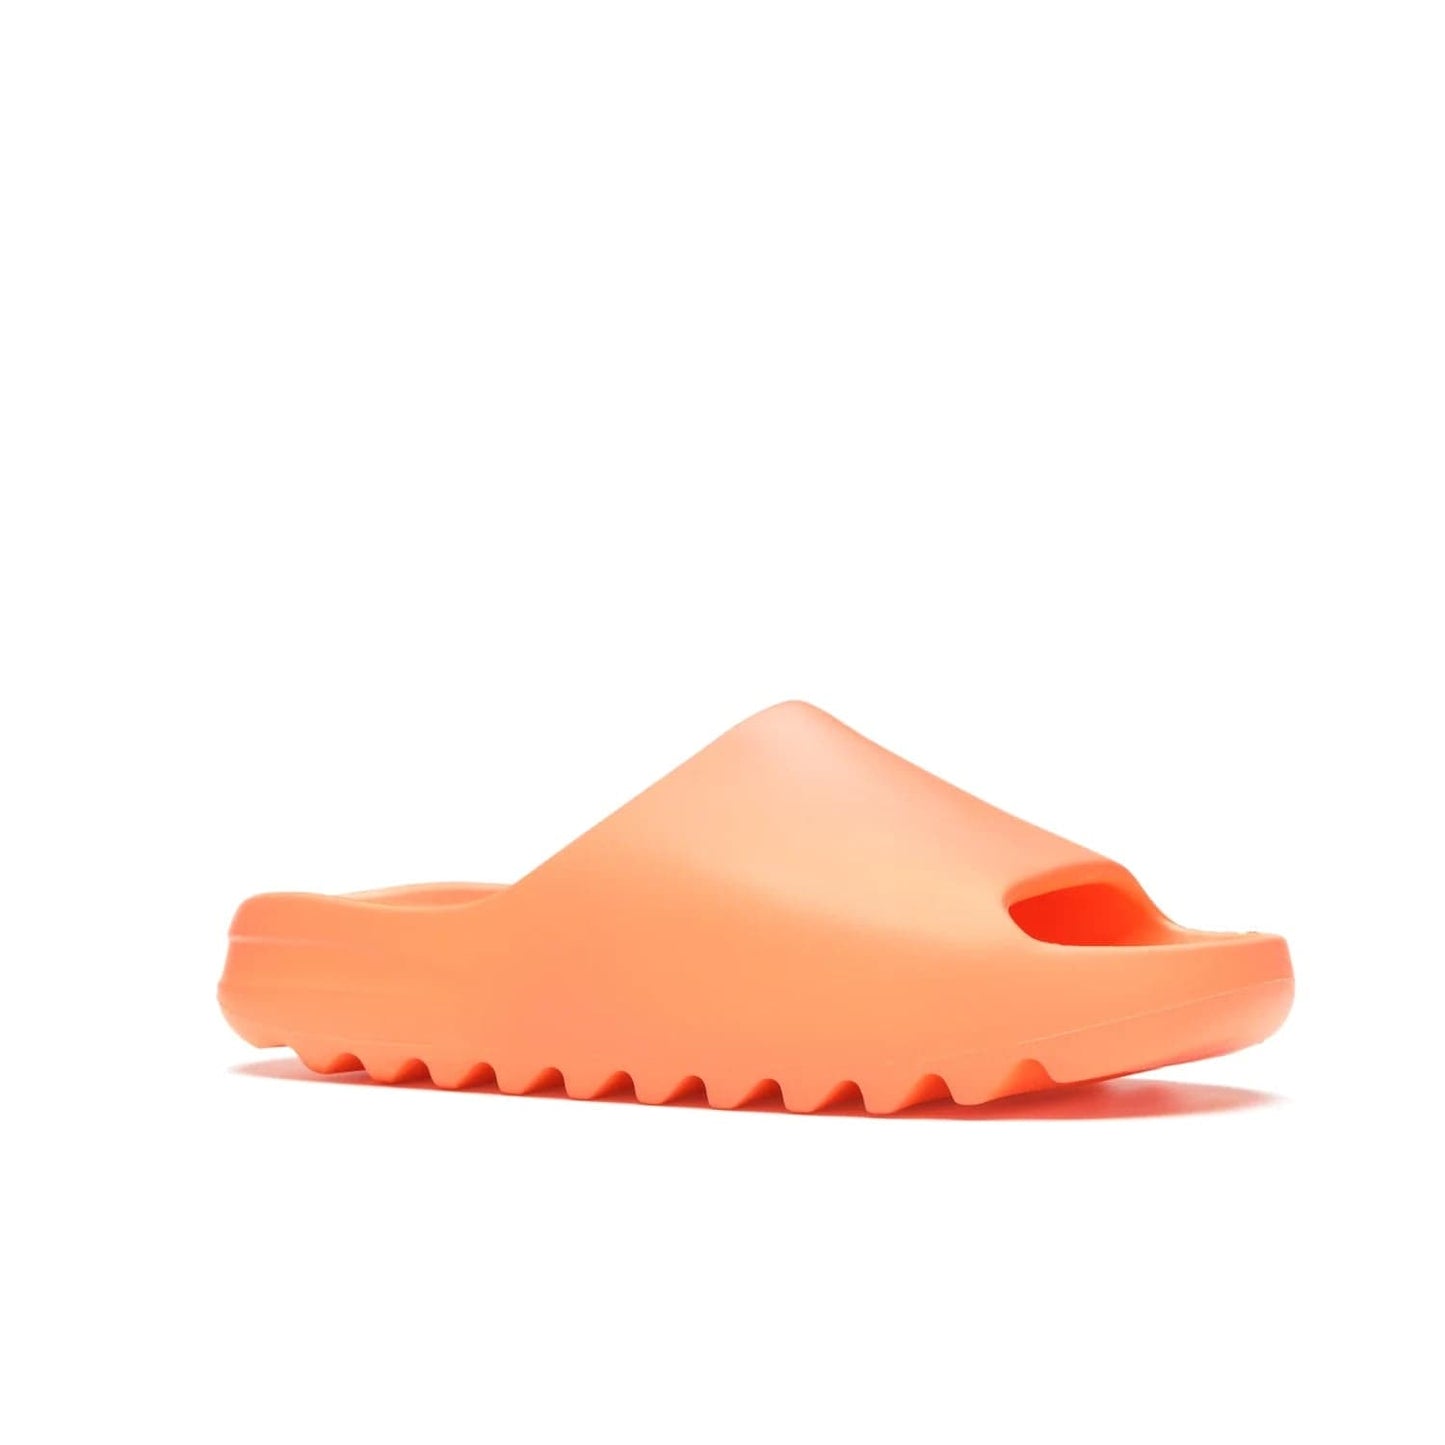 adidas Yeezy Slide Enflame Orange - Image 4 - Only at www.BallersClubKickz.com - Limited edition adidas Yeezy Slide featuring a bold Enflame Orange upper and EVA foam construction. Grooved outsole for traction and support. Released June 2021. Perfect for summer.